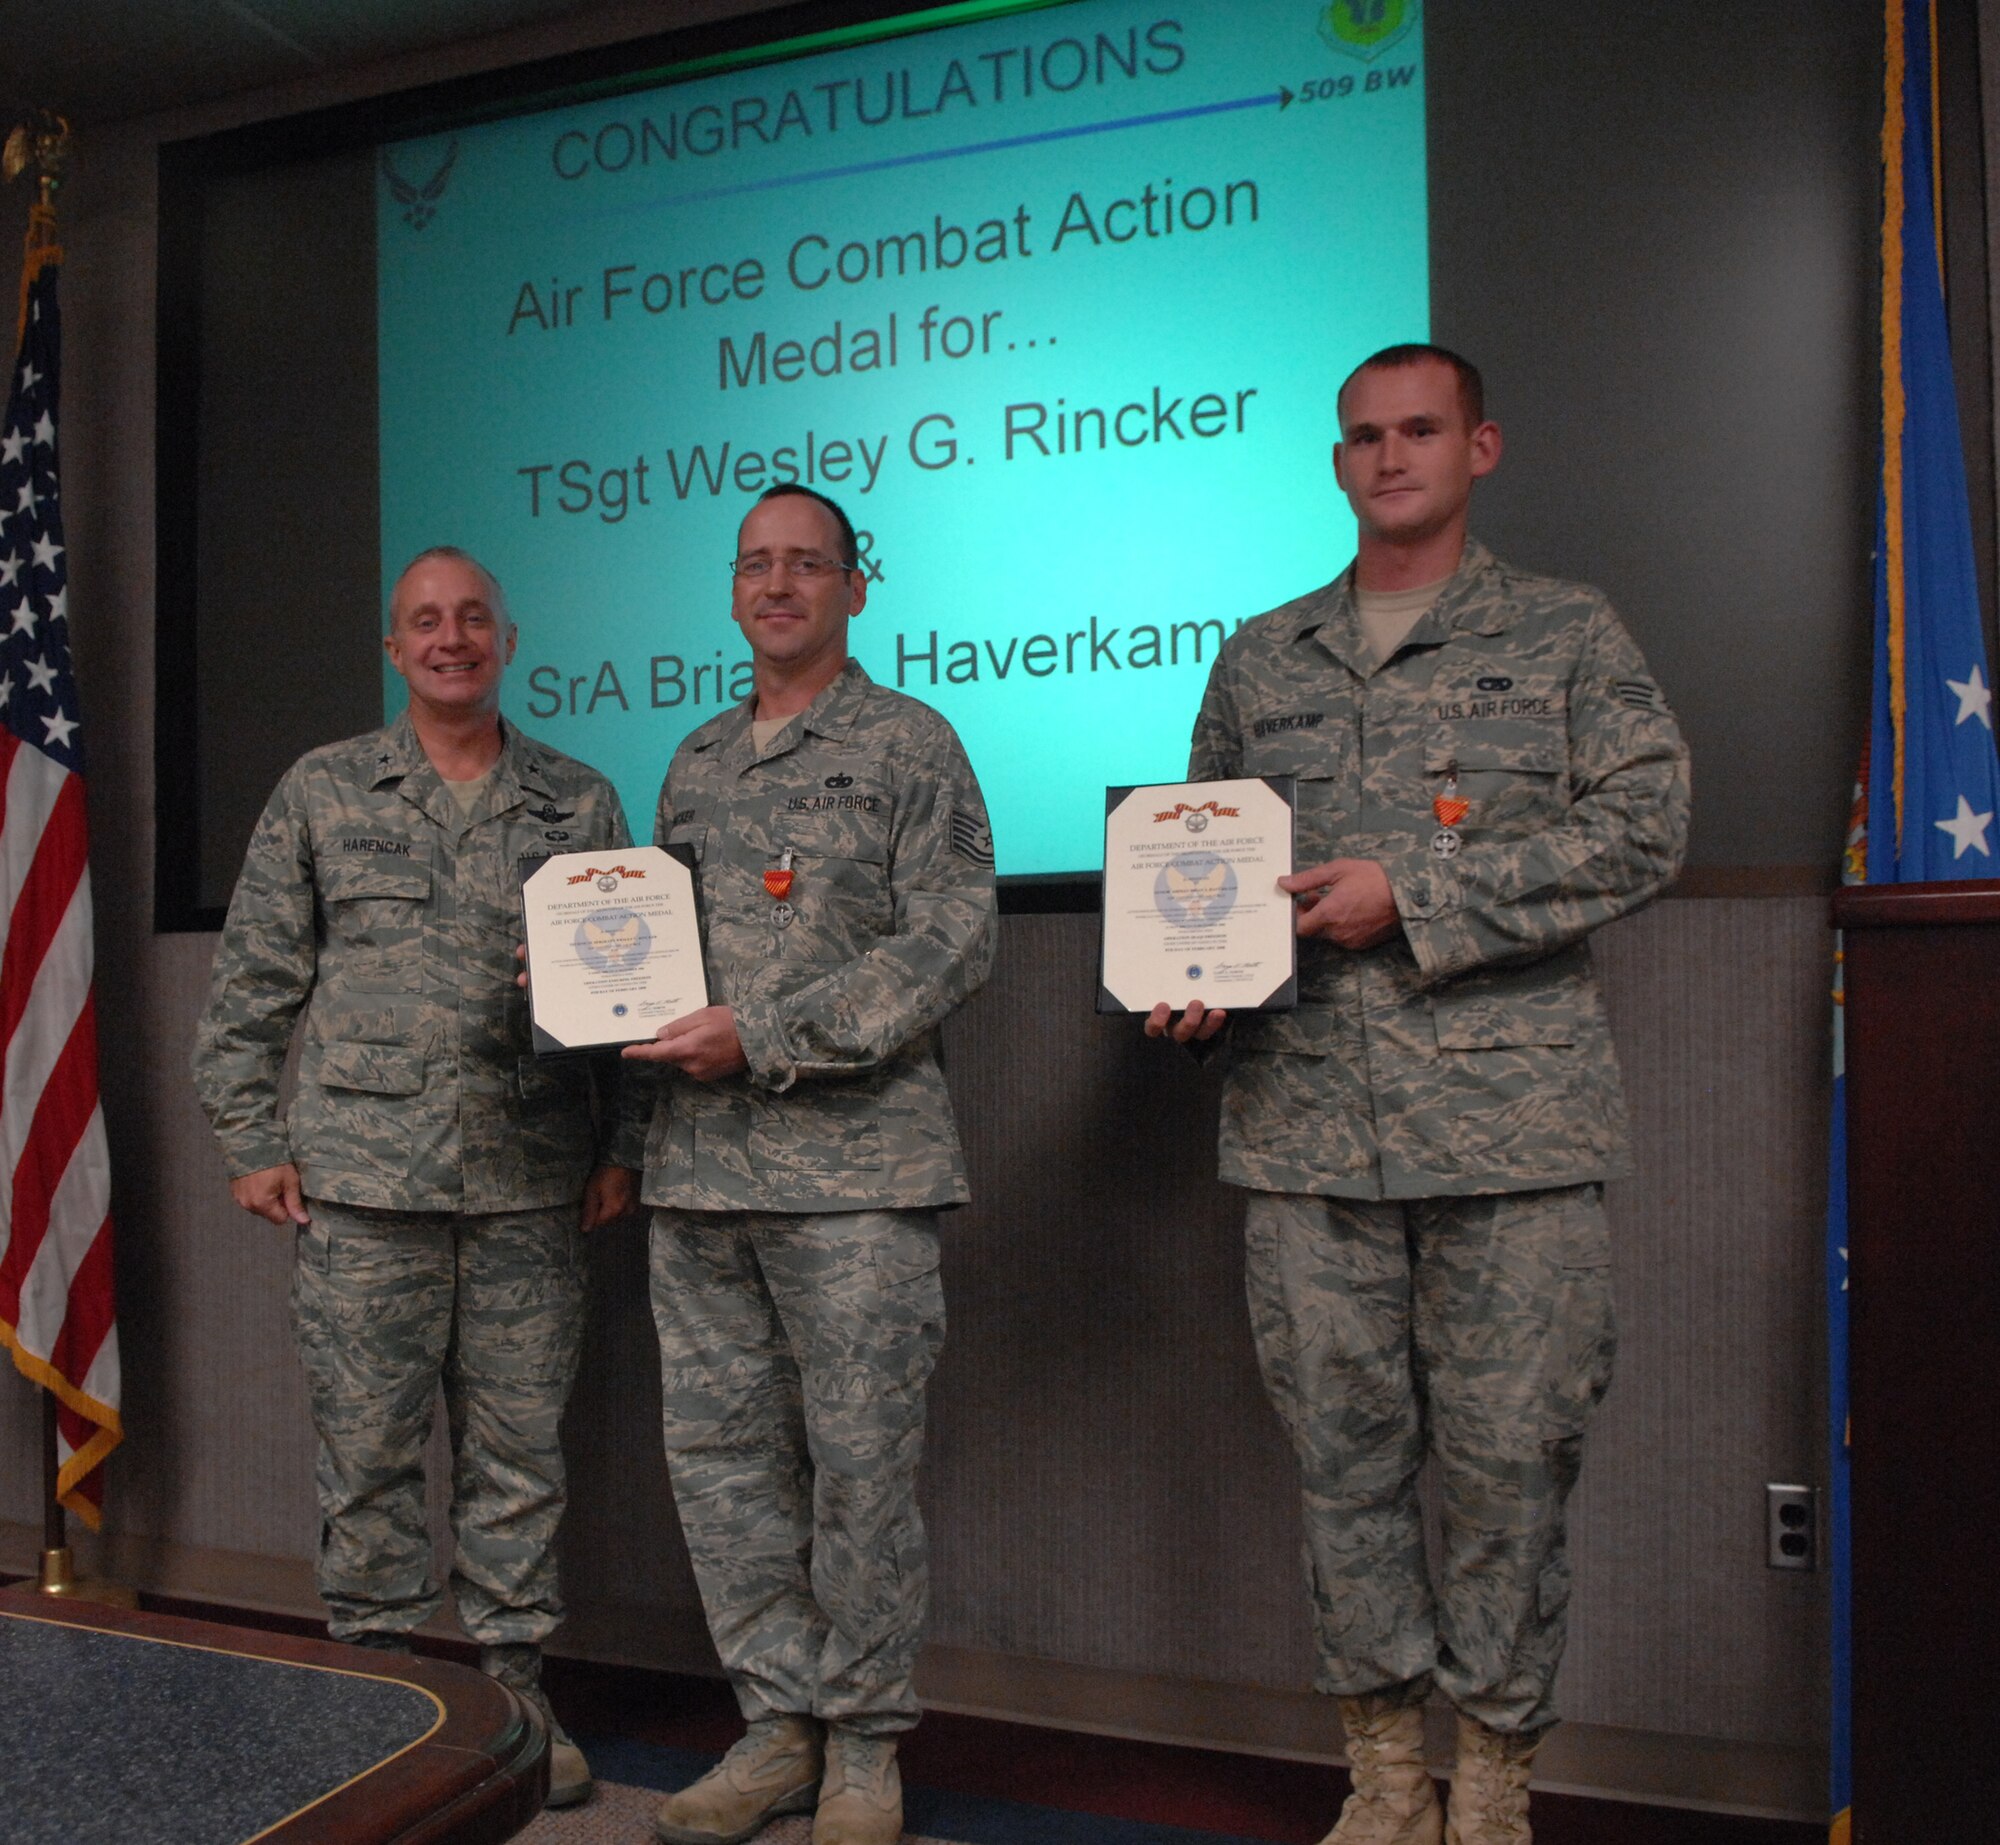 WHITEMAN AIR FORCE BASE, Mo. – Tech. Sgt. Wesley Rincker and Senior Airman Brain Haverkamp, 509th Logistics Readiness Squadron, receive Air Force Combat Action medals Oct. 15 from Brig. Gen. Garrett Harencak, 509th Bomb Wing commander. They each received their medal for actions while deployed to the 70th Medium Truck Detachment. (U.S. Air Force photo/Senior Airman Stephen Linch)